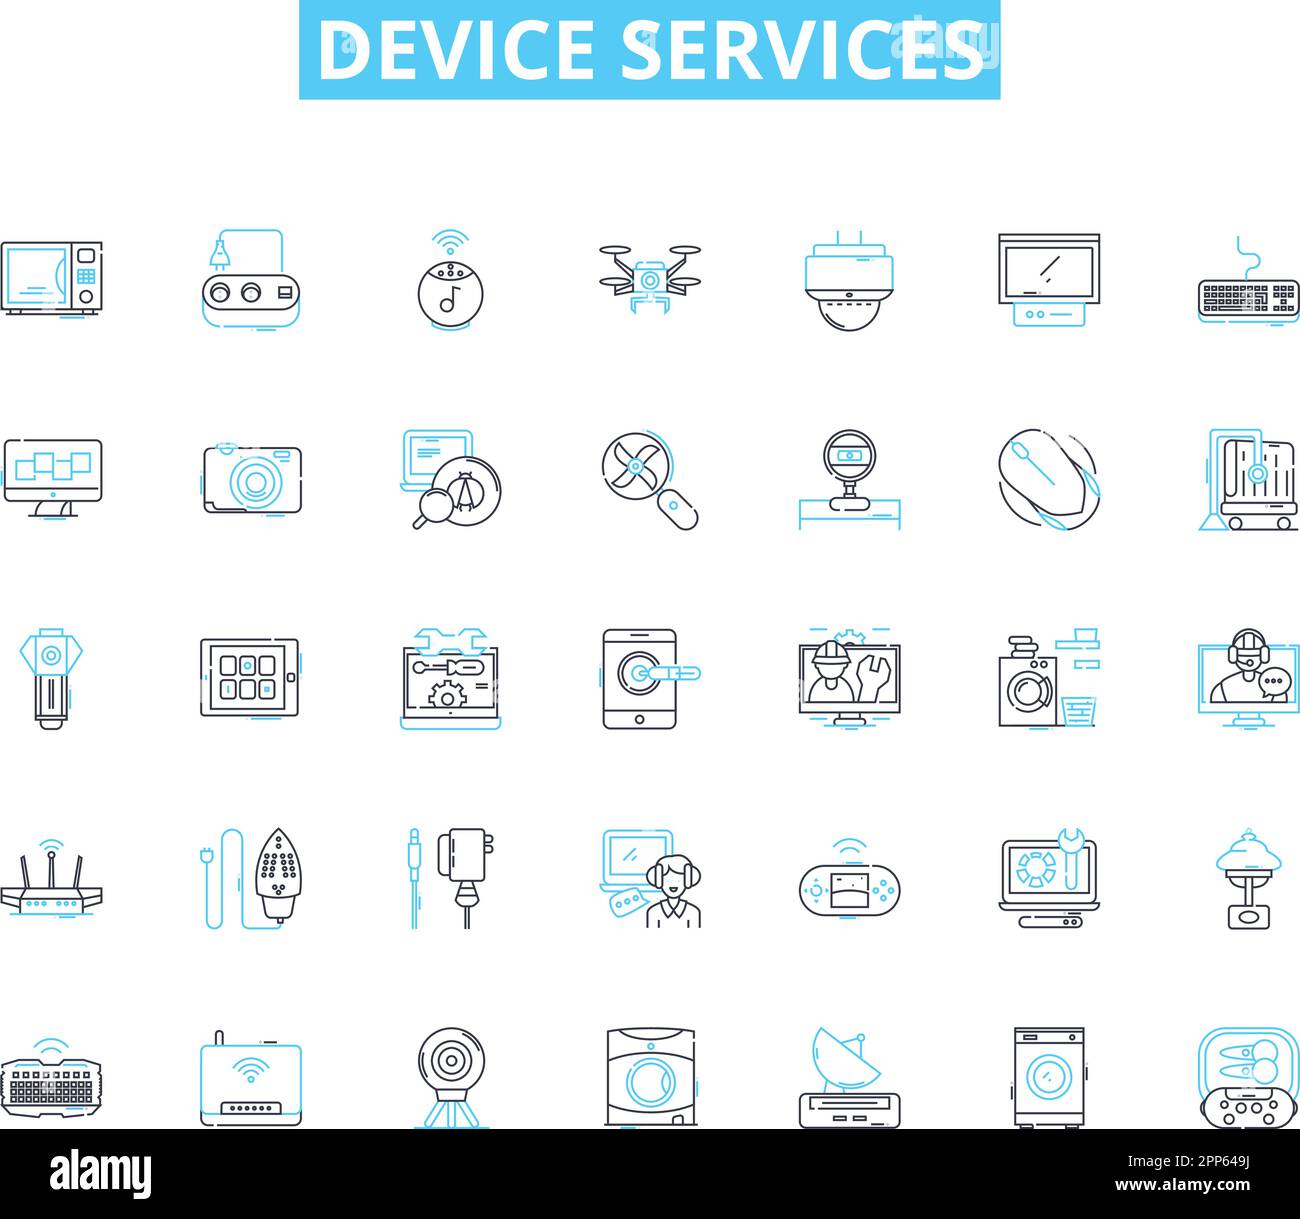 Device services linear icons set. Repairs, Maintenance, Upgrades, Optimization, Diagnostics, Troubleshooting, Configuration line vector and concept Stock Vector